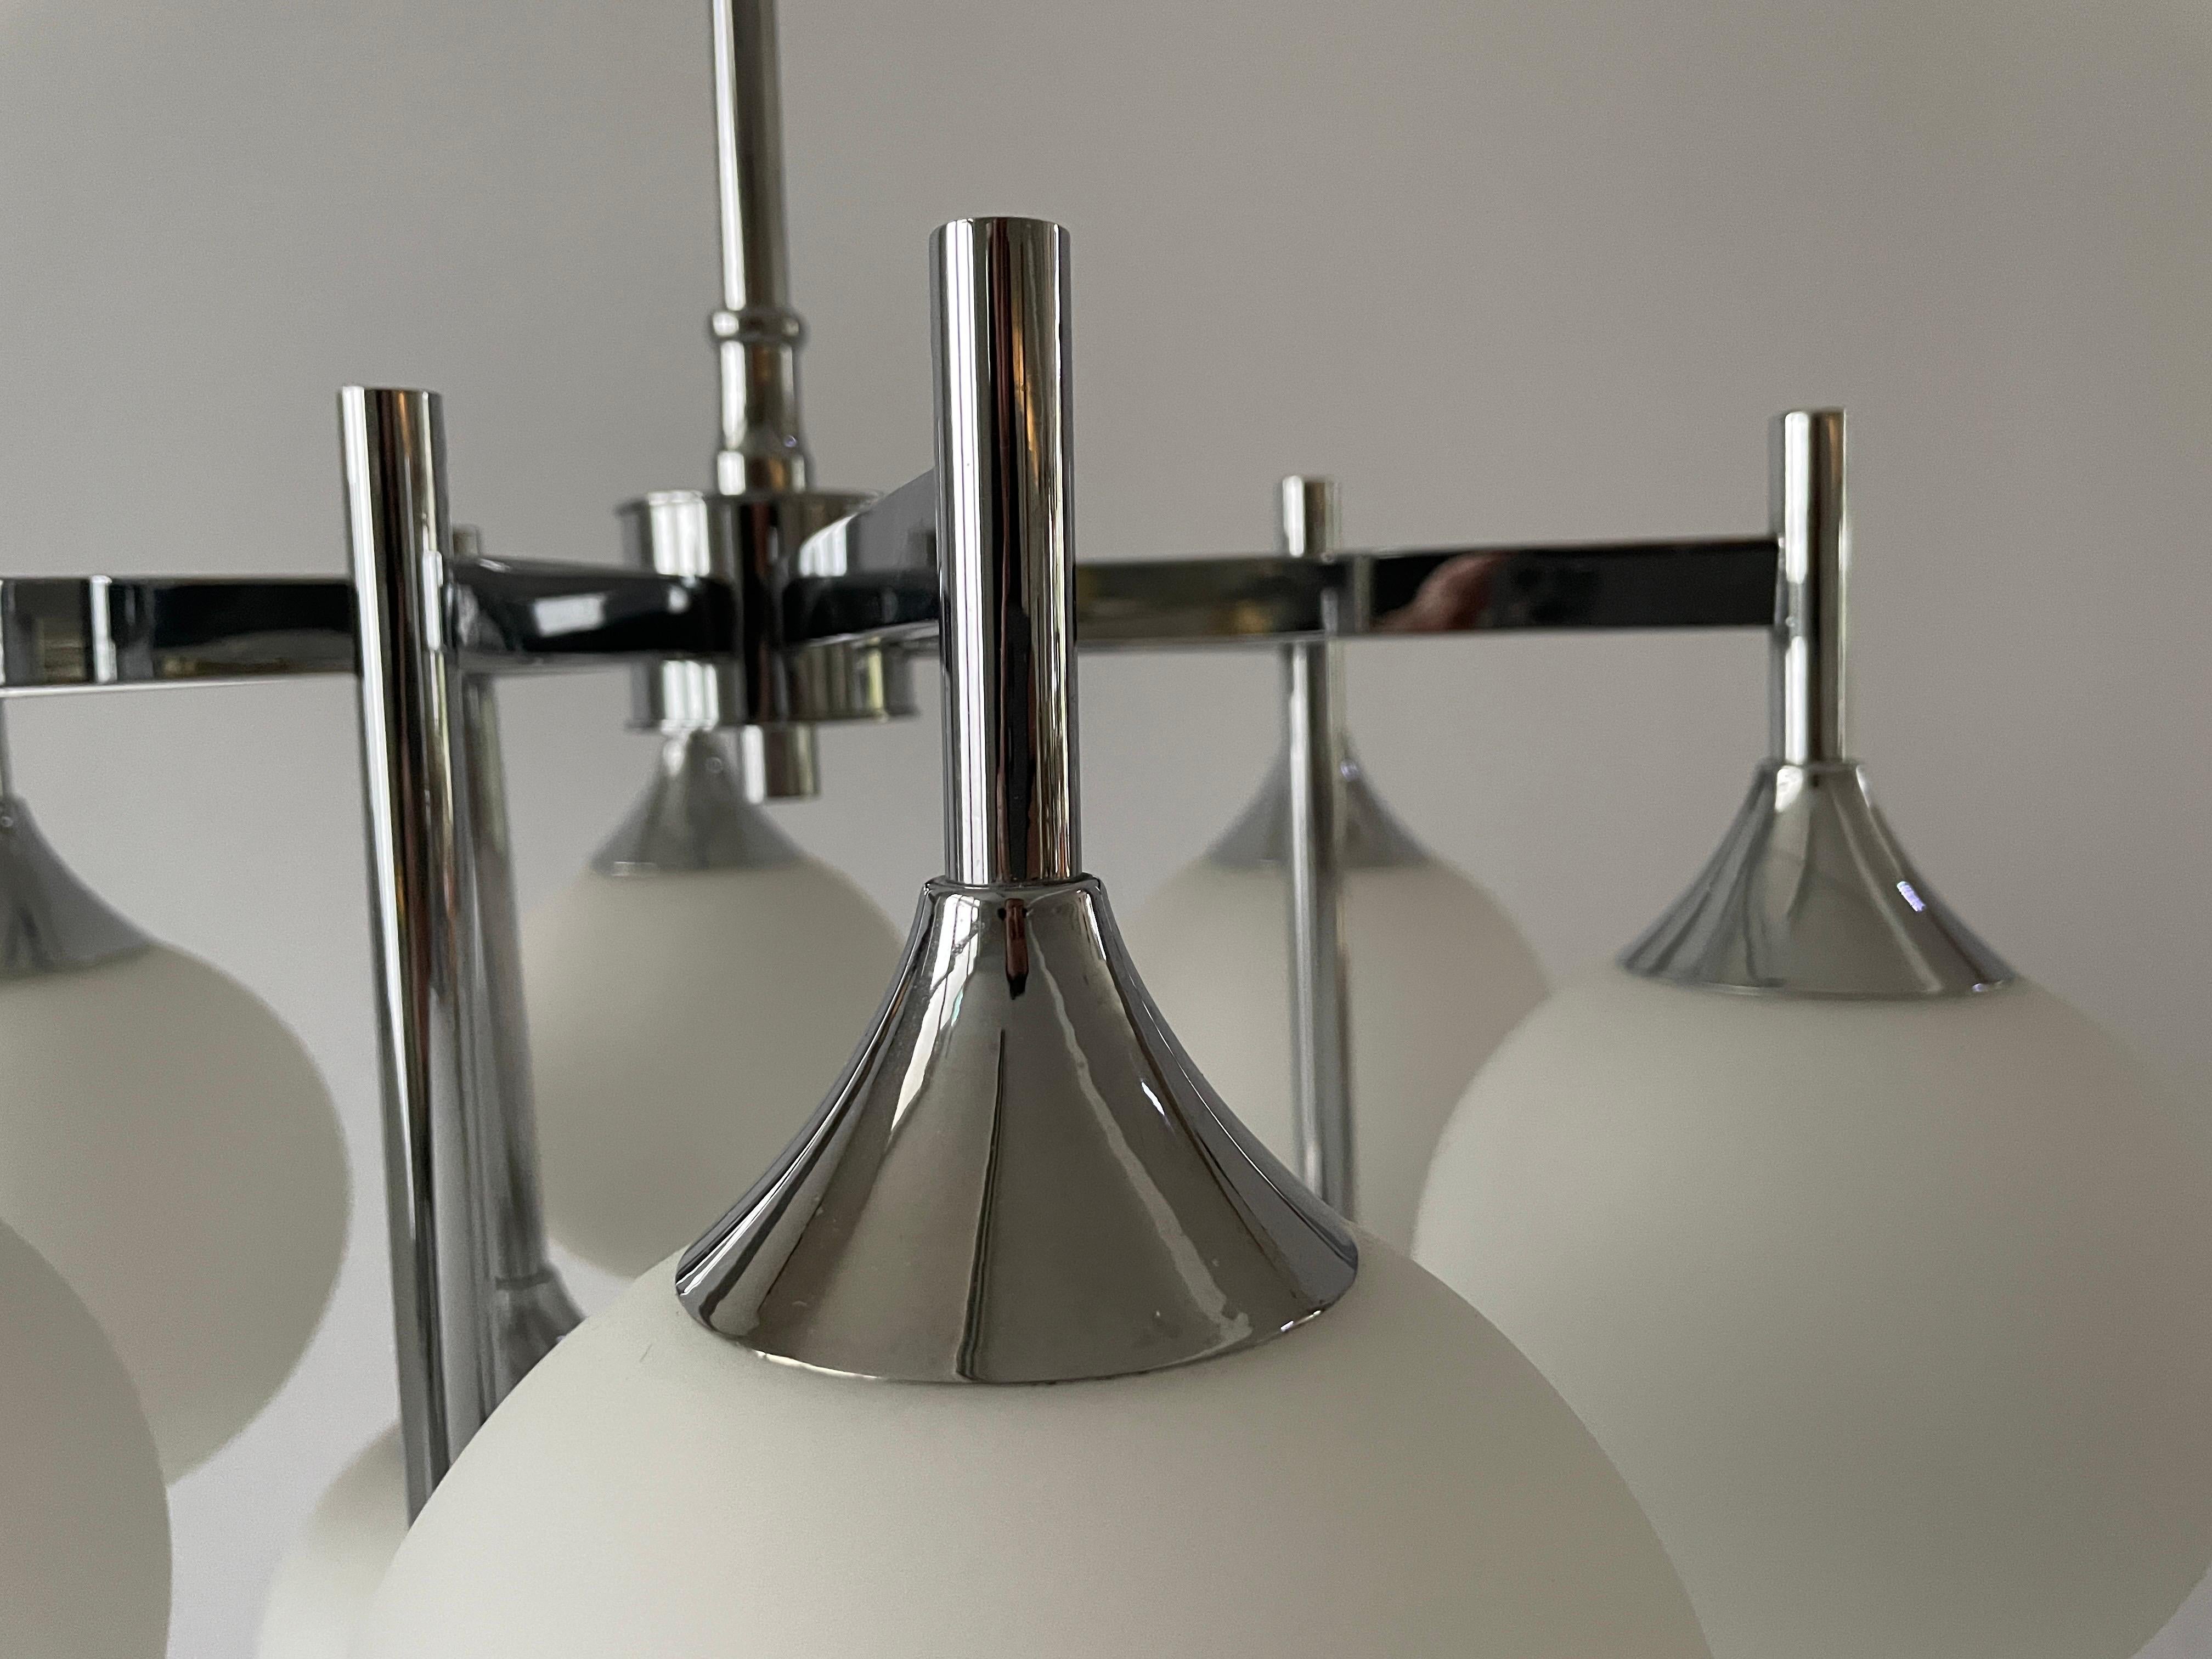 9 White Ball Glass and Chrome Body Chandelier by Kaiser Leuchten, 1960s, Germany For Sale 1